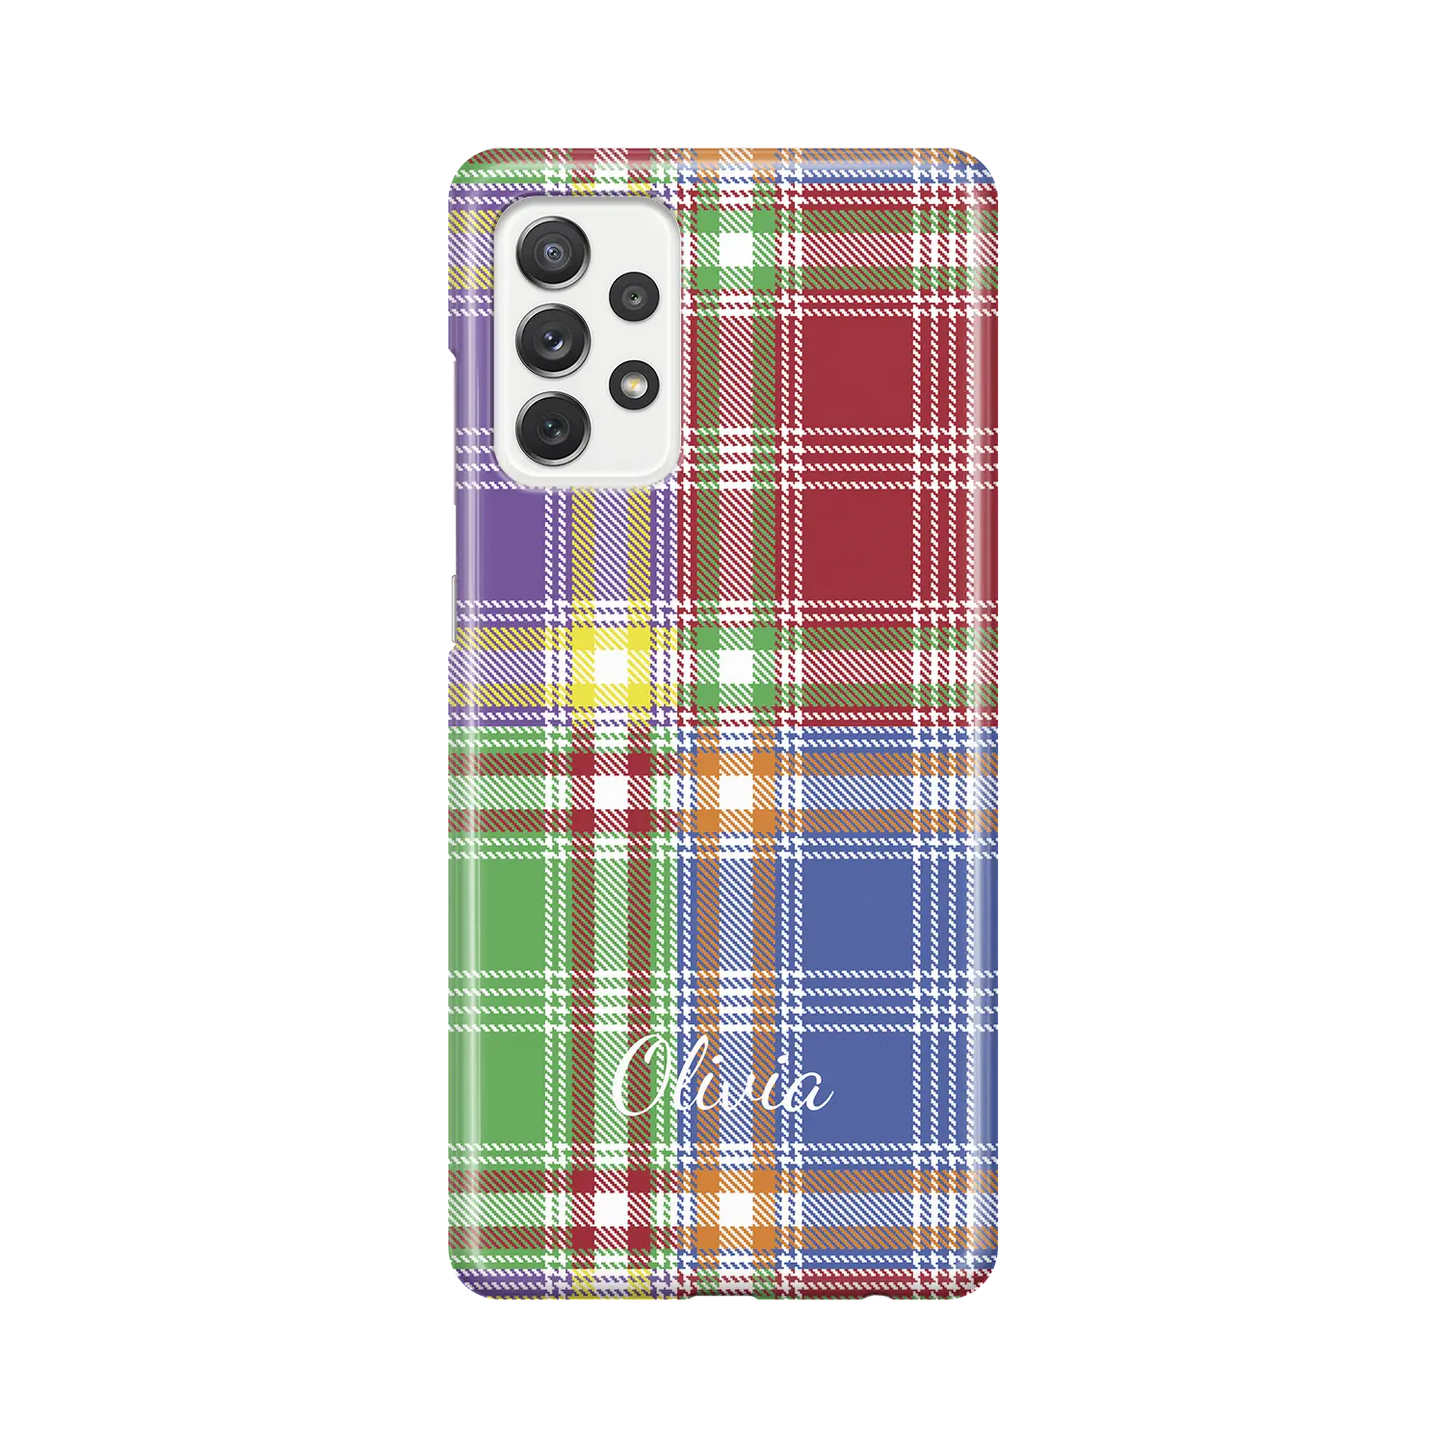 Plaid & Simple - Personalised Galaxy A Case